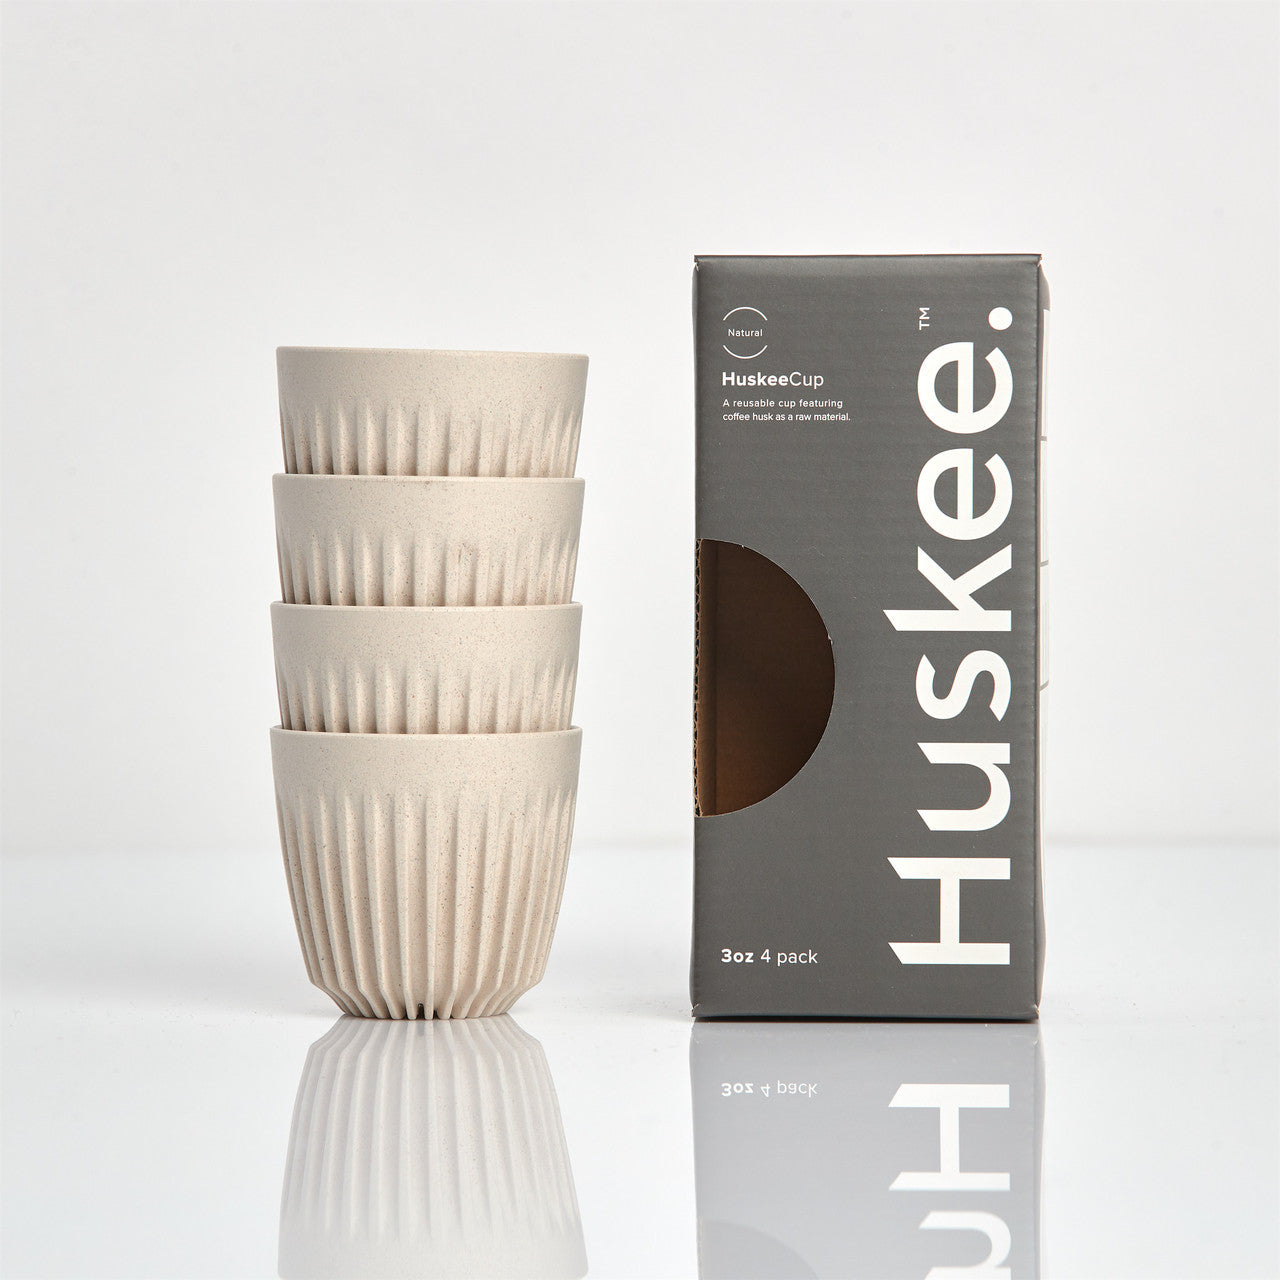 Huskee Cup Natural 3oz